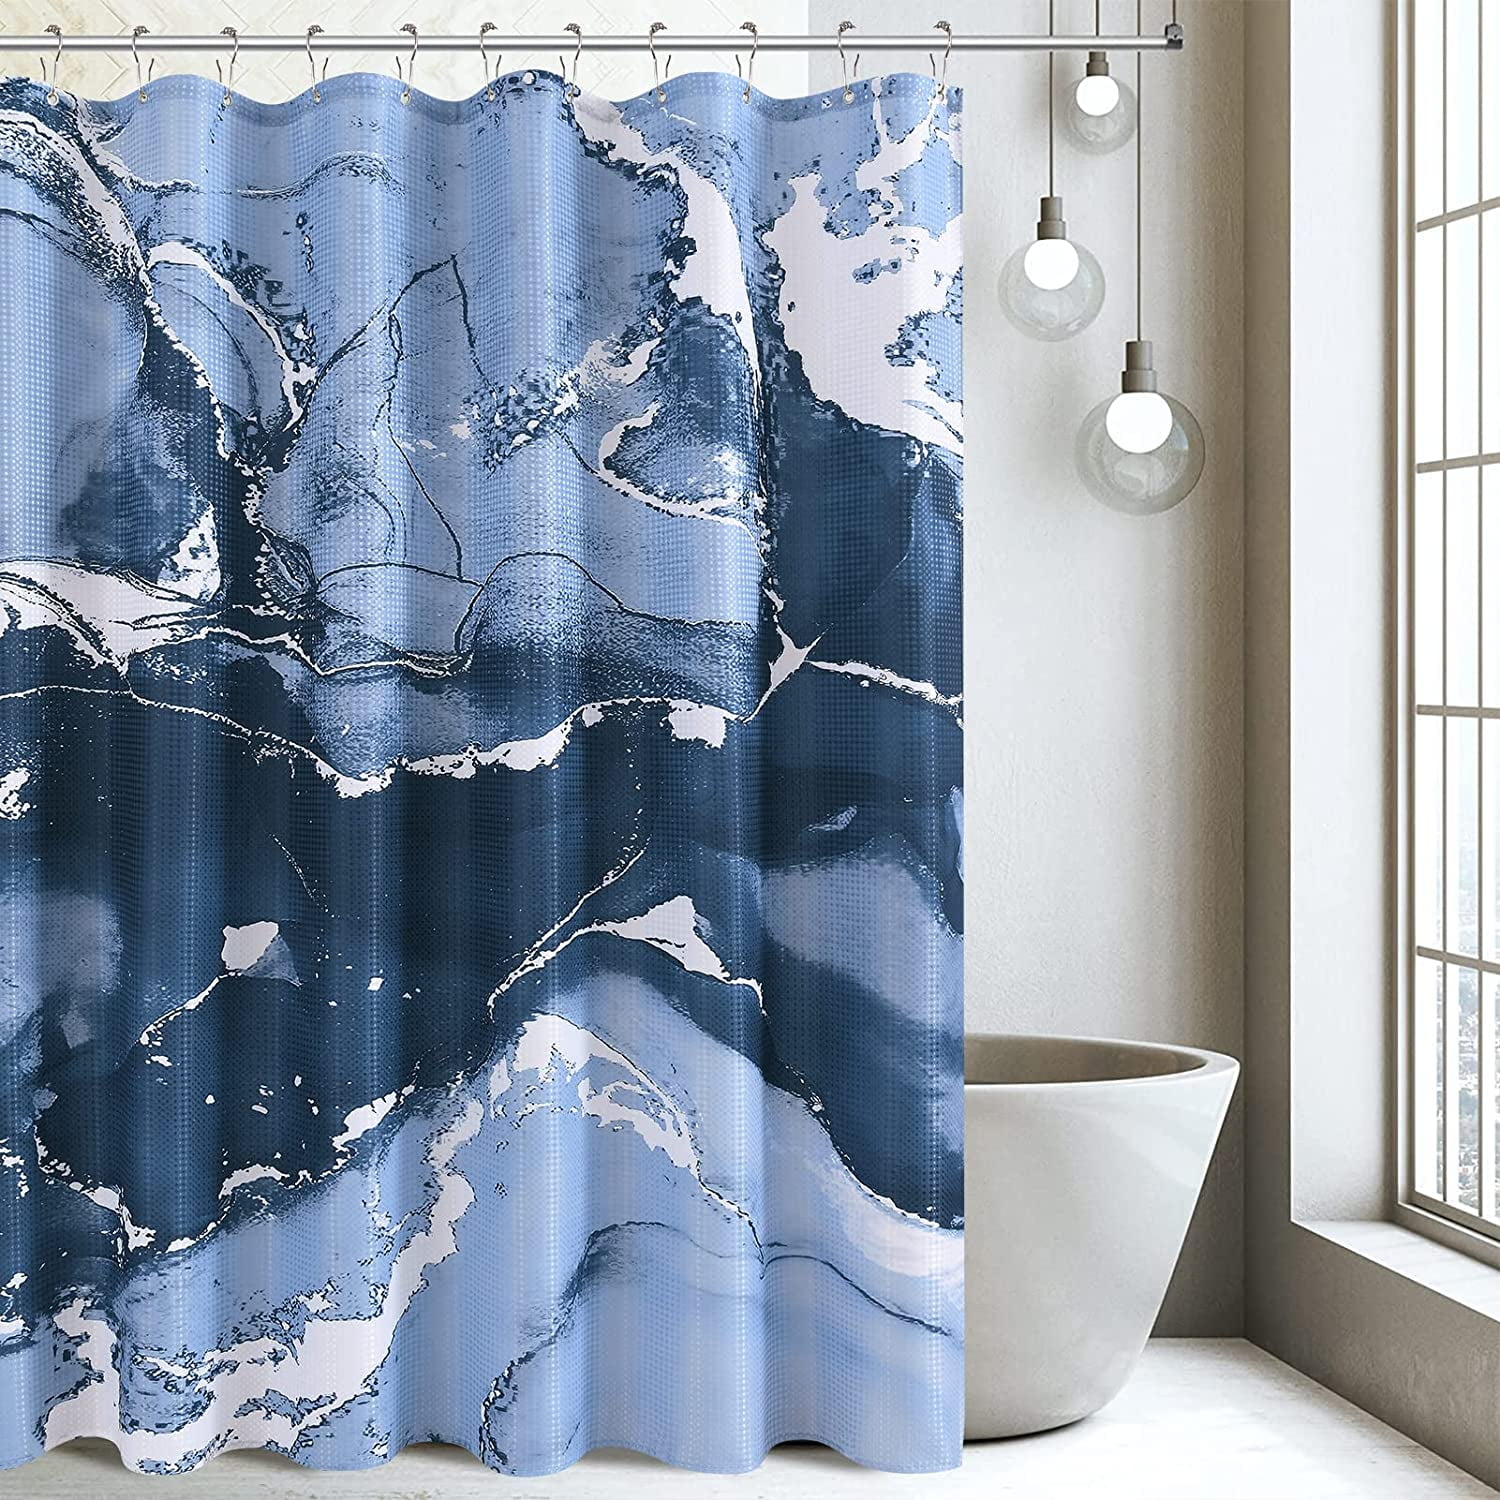 Navy Shower Curtain Marble, Modern Abstract Shower Curtain with 12  Hooks,Navy Blue Bathroom Shower Curtain,Blue and White Fabric Art Shower